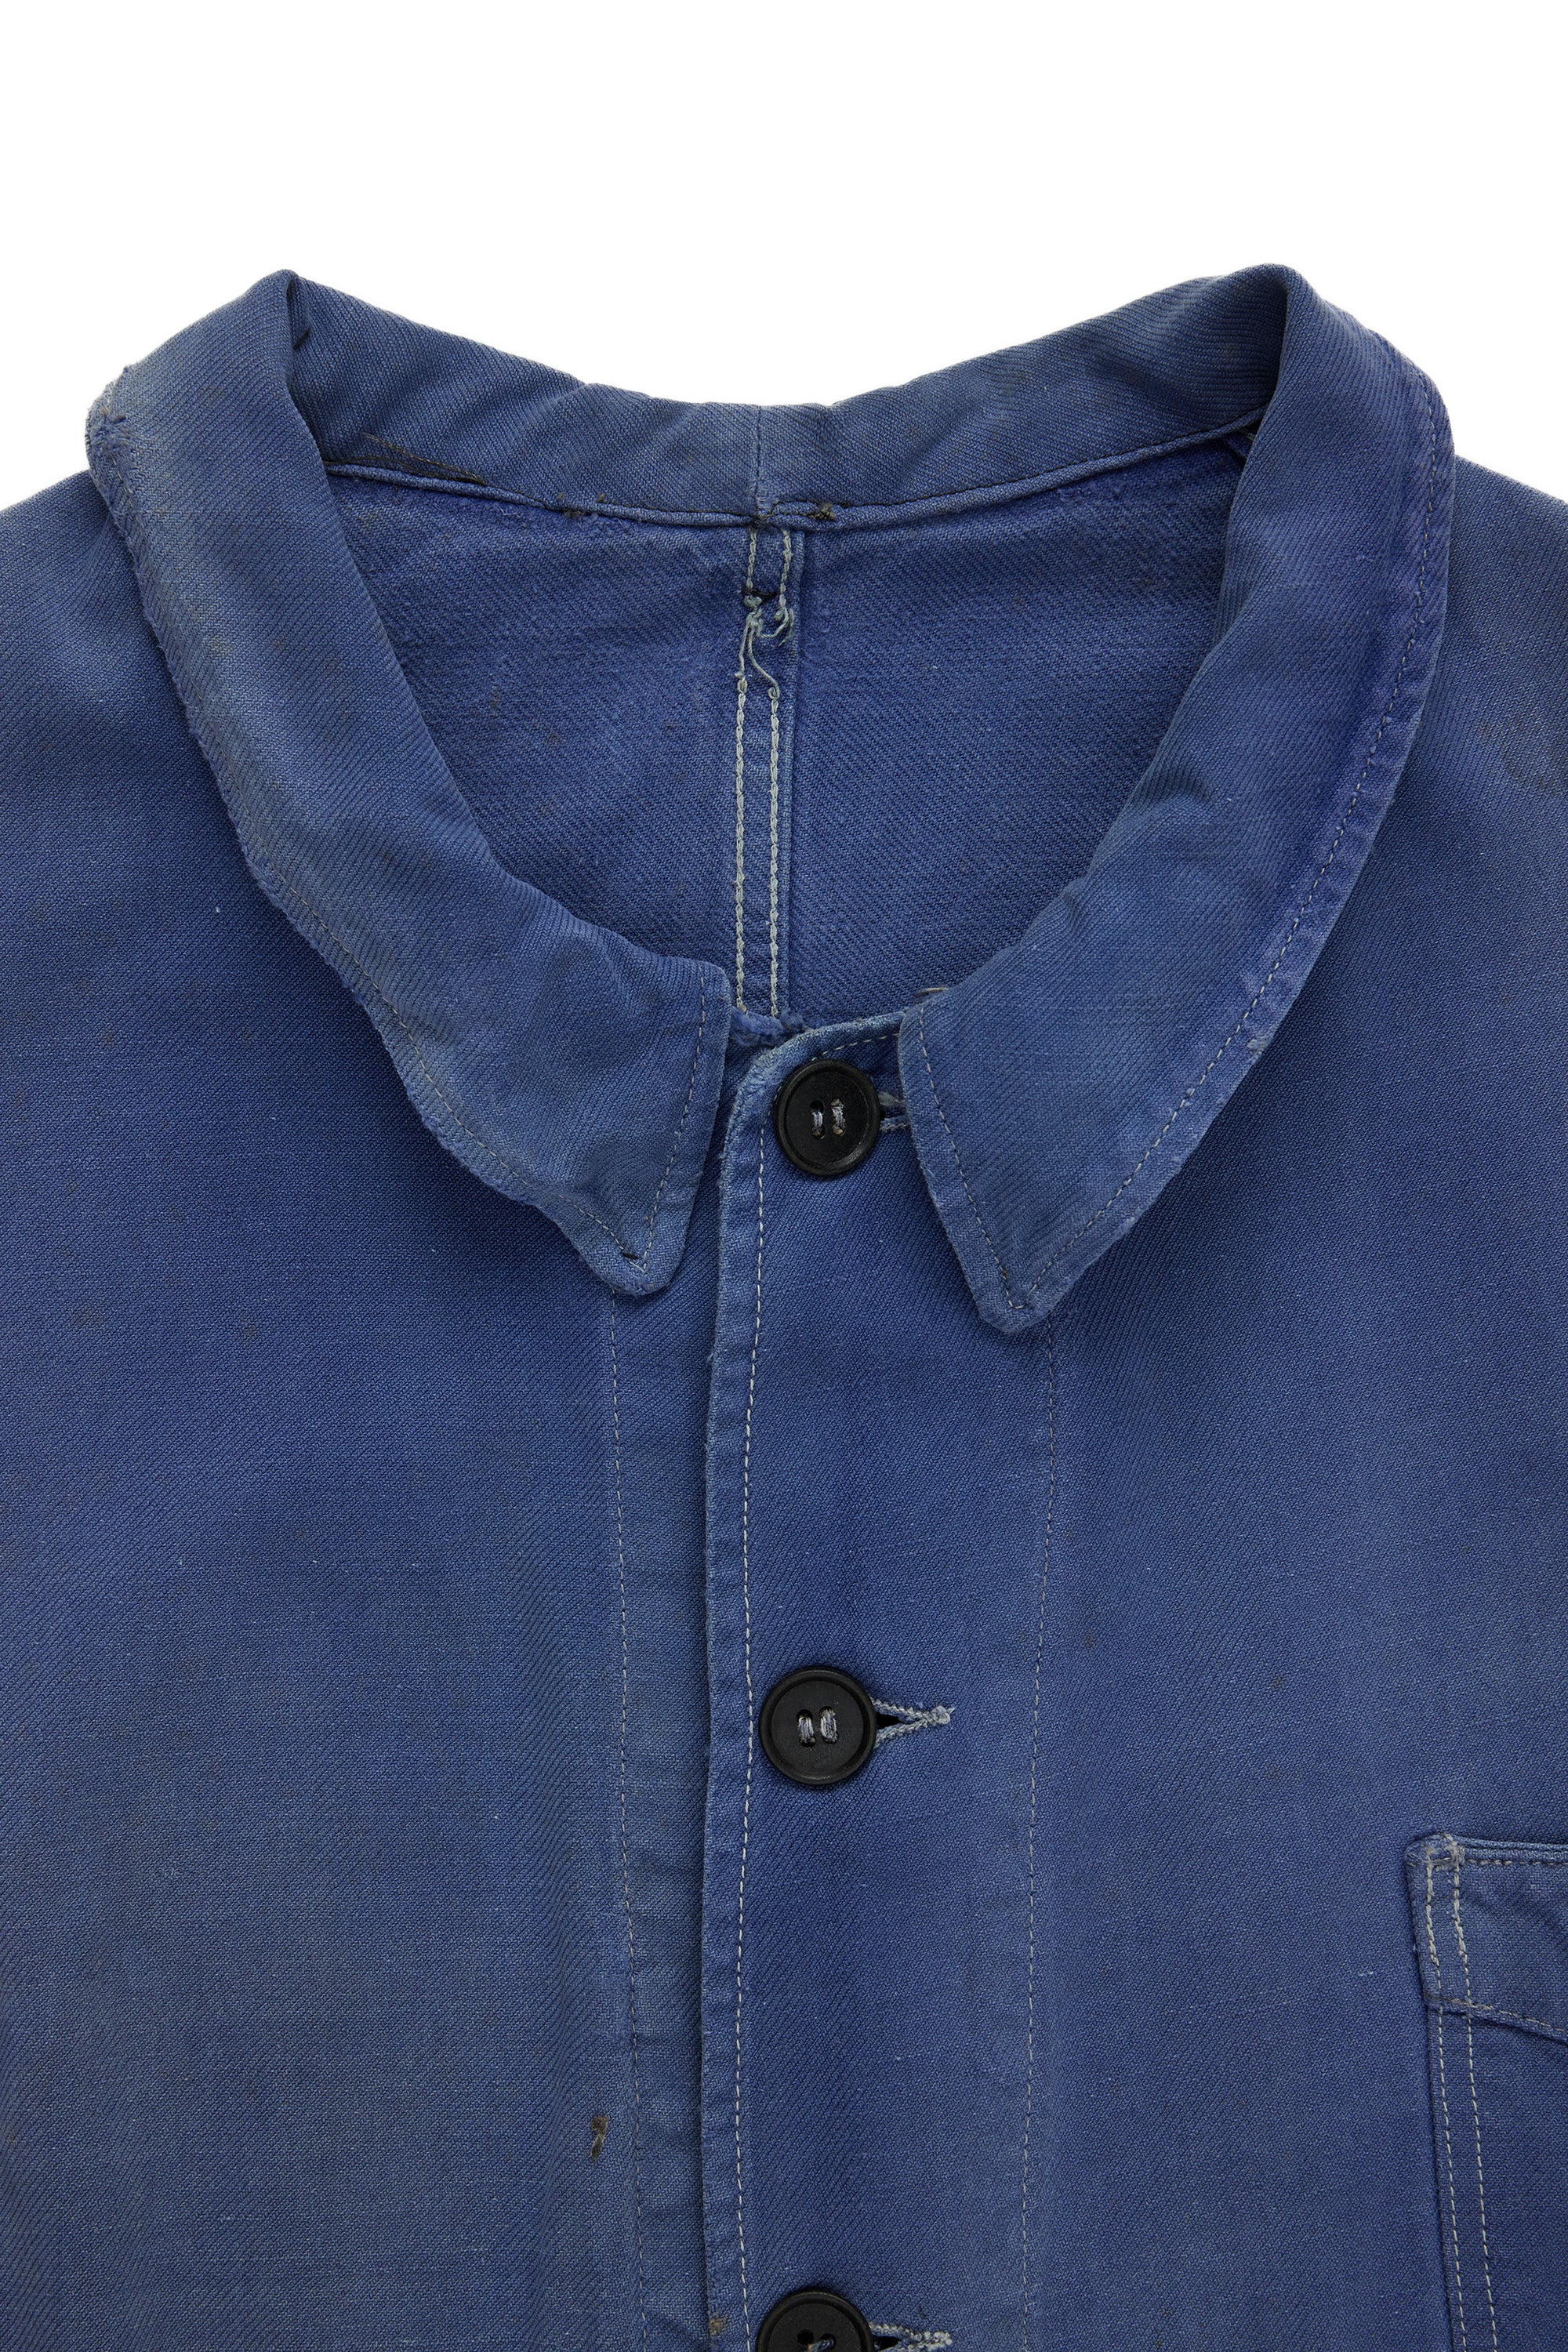 French Cotton Repaired Jacket